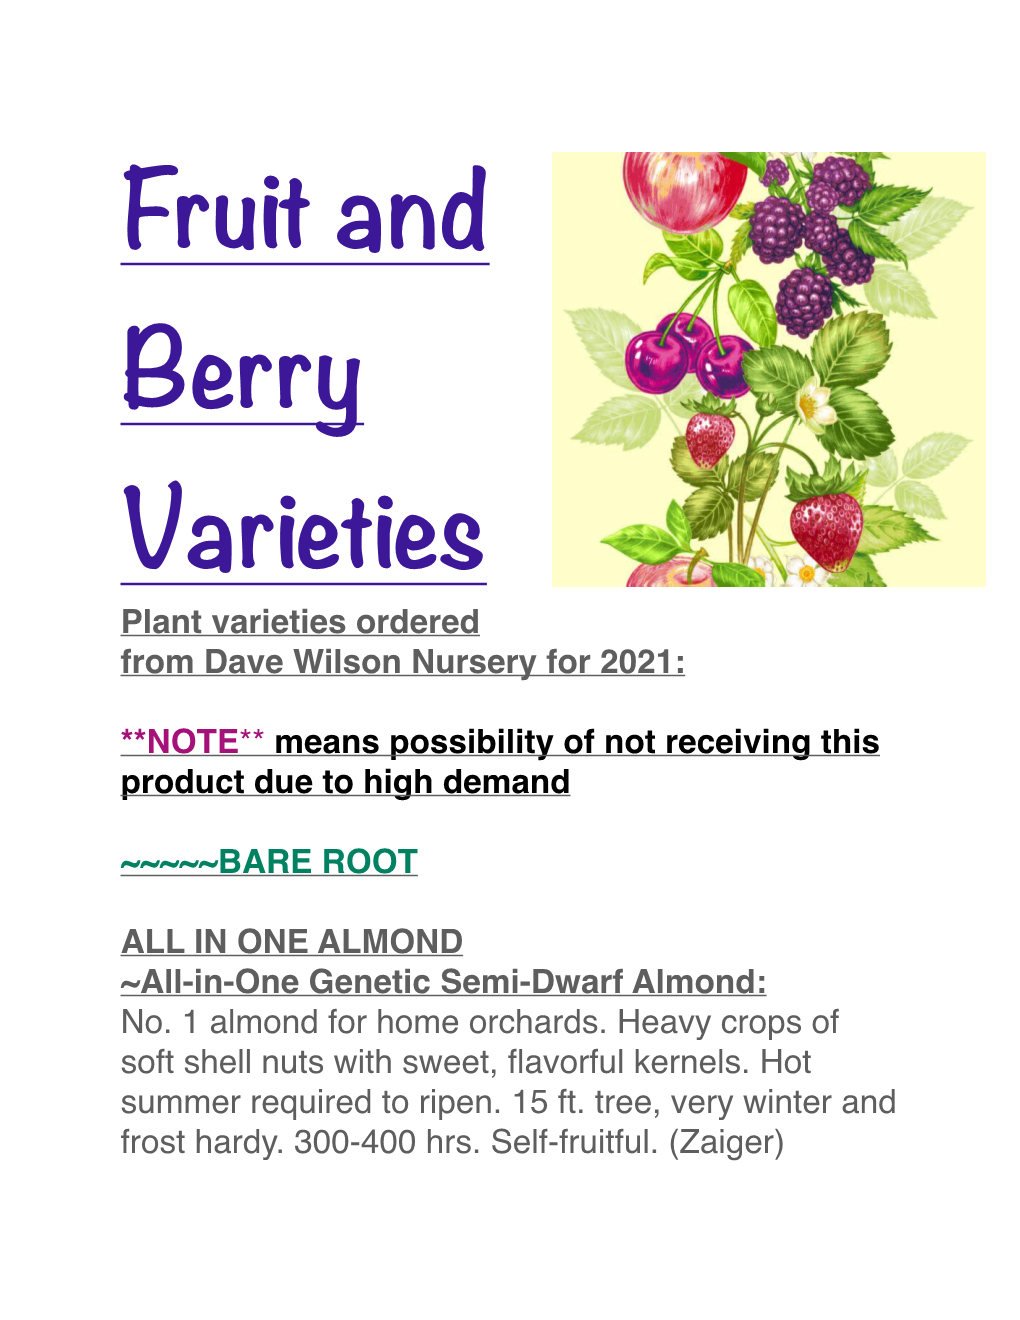 Fruit and Berry Varieties Plant Varieties Ordered from Dave Wilson Nursery for 2021